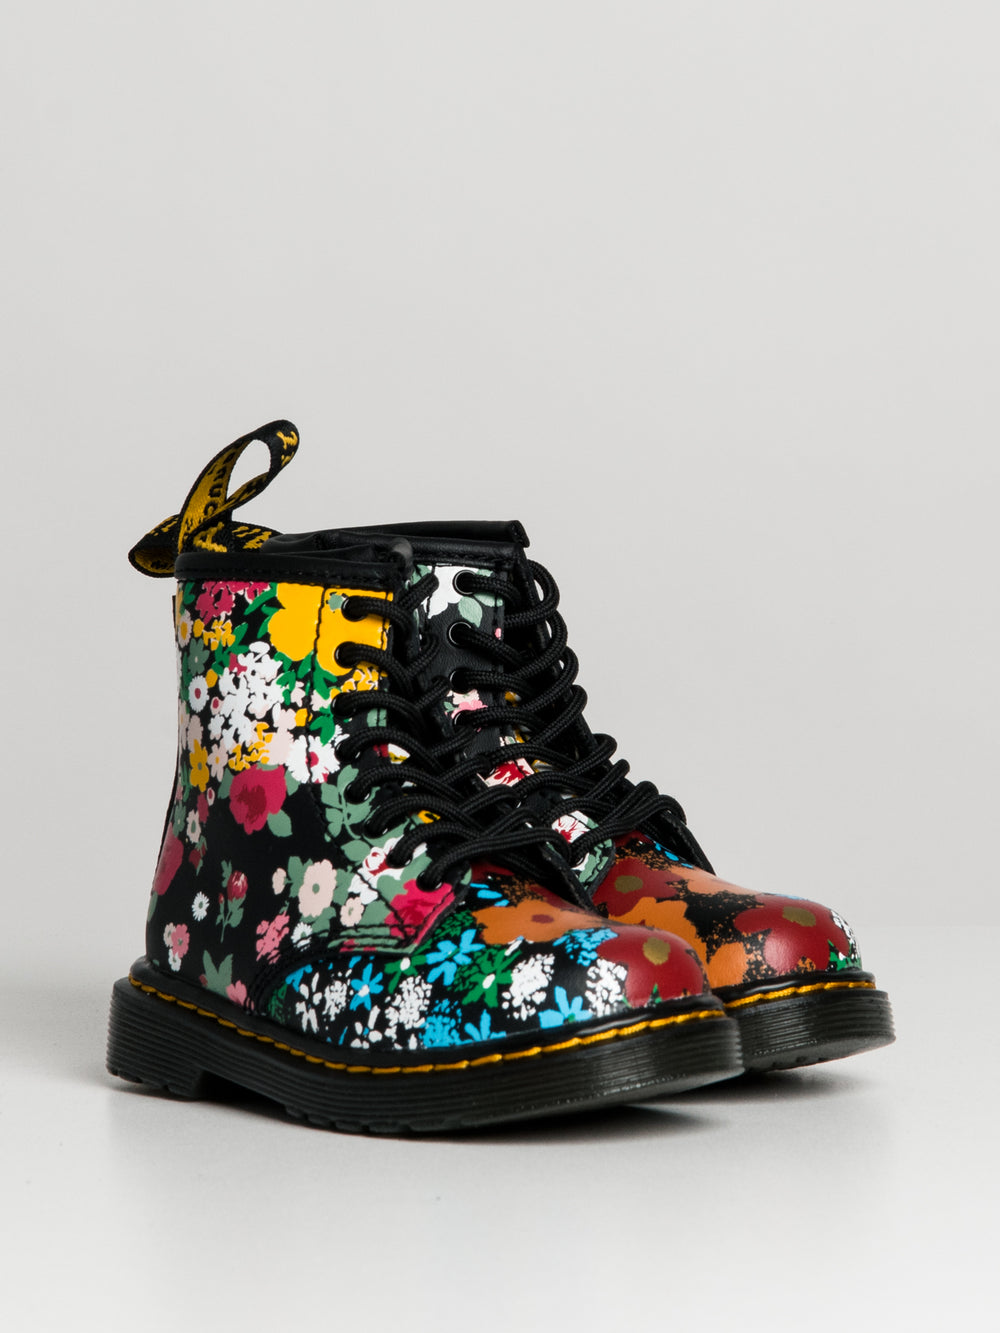 DR MARTENS TODDLER 1460 FLORAL MASH UP HYDRO BOOTS - CLEARANCE